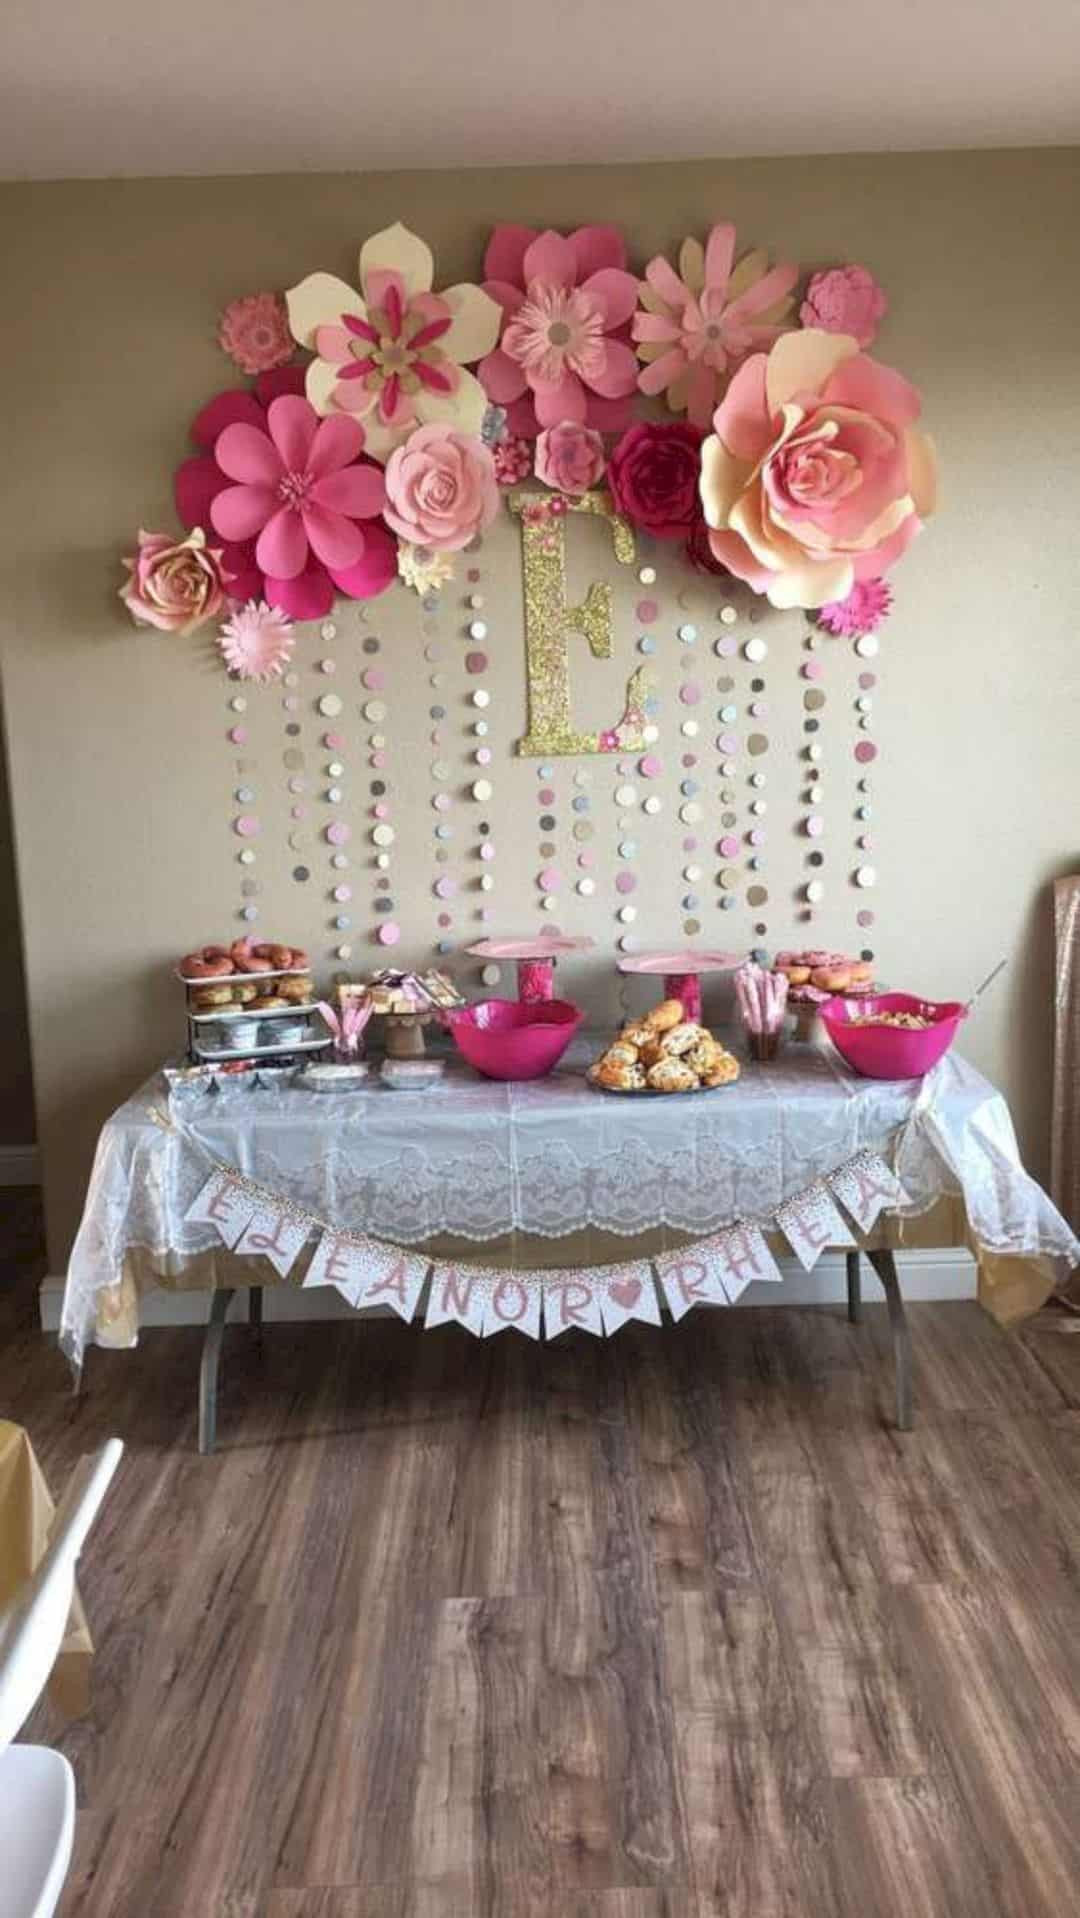 Girl Baby Shower Decoration Ideas
 16 Cute Baby Shower Decorating Ideas